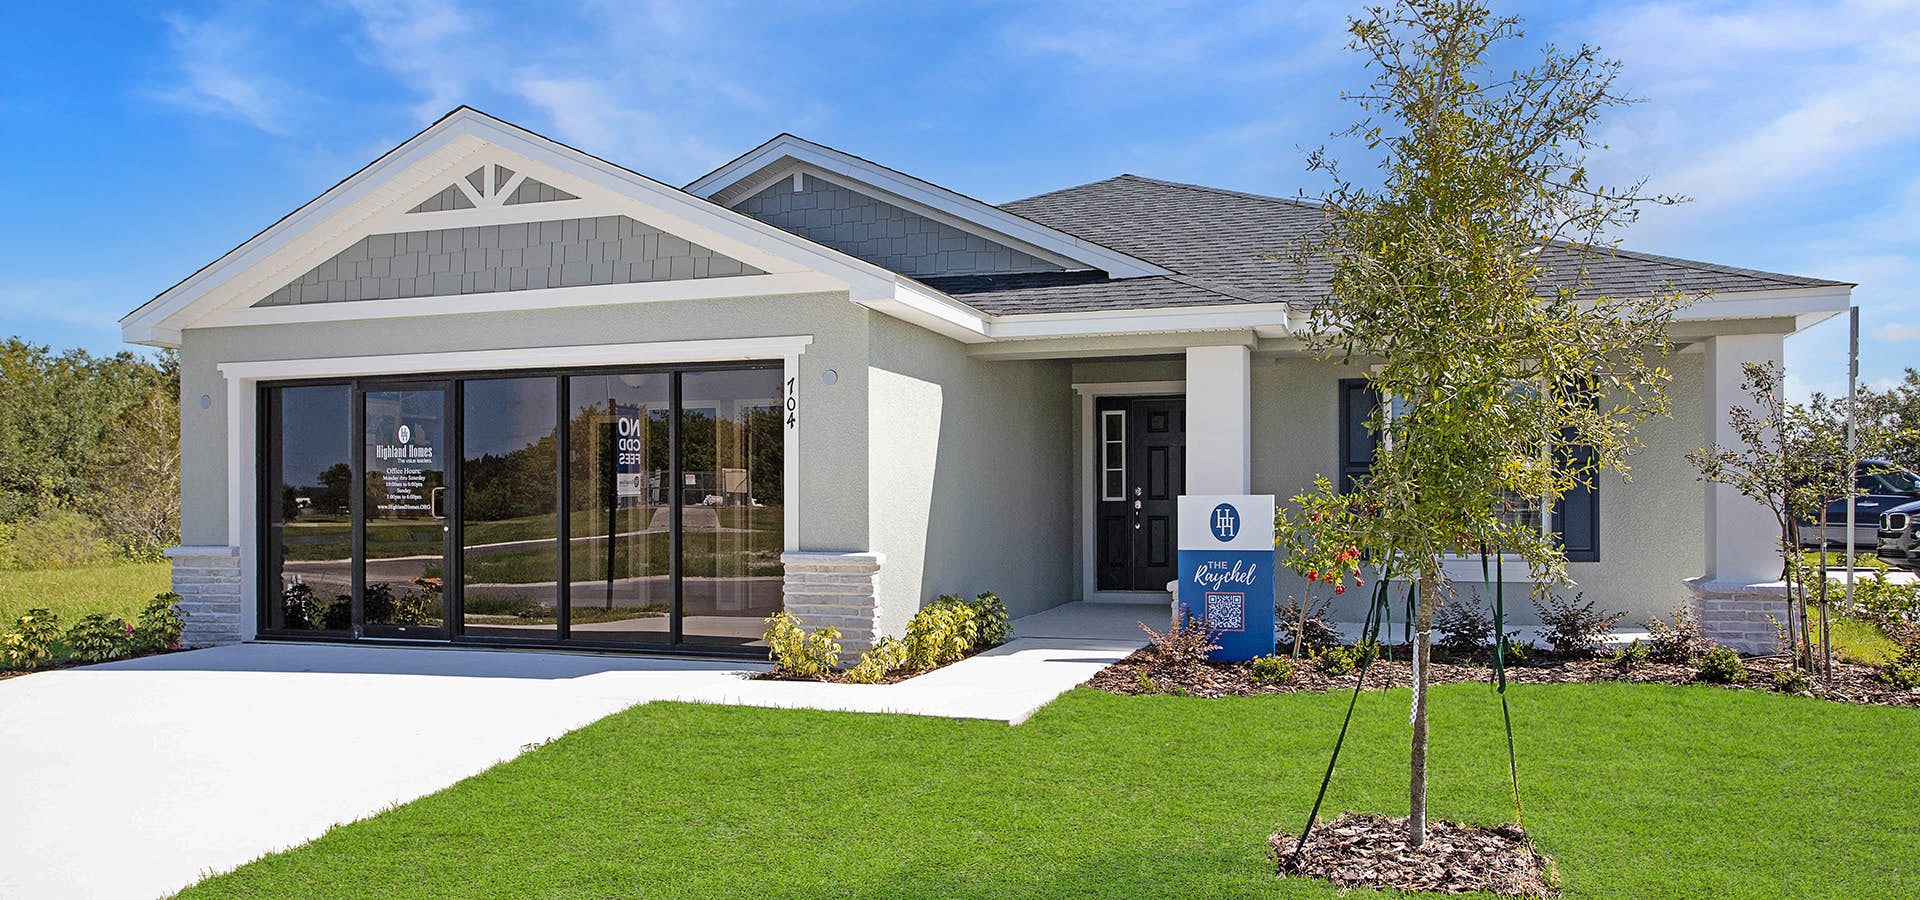 Exterior of model home at Bridgeport Lakes in Mulberry, FL